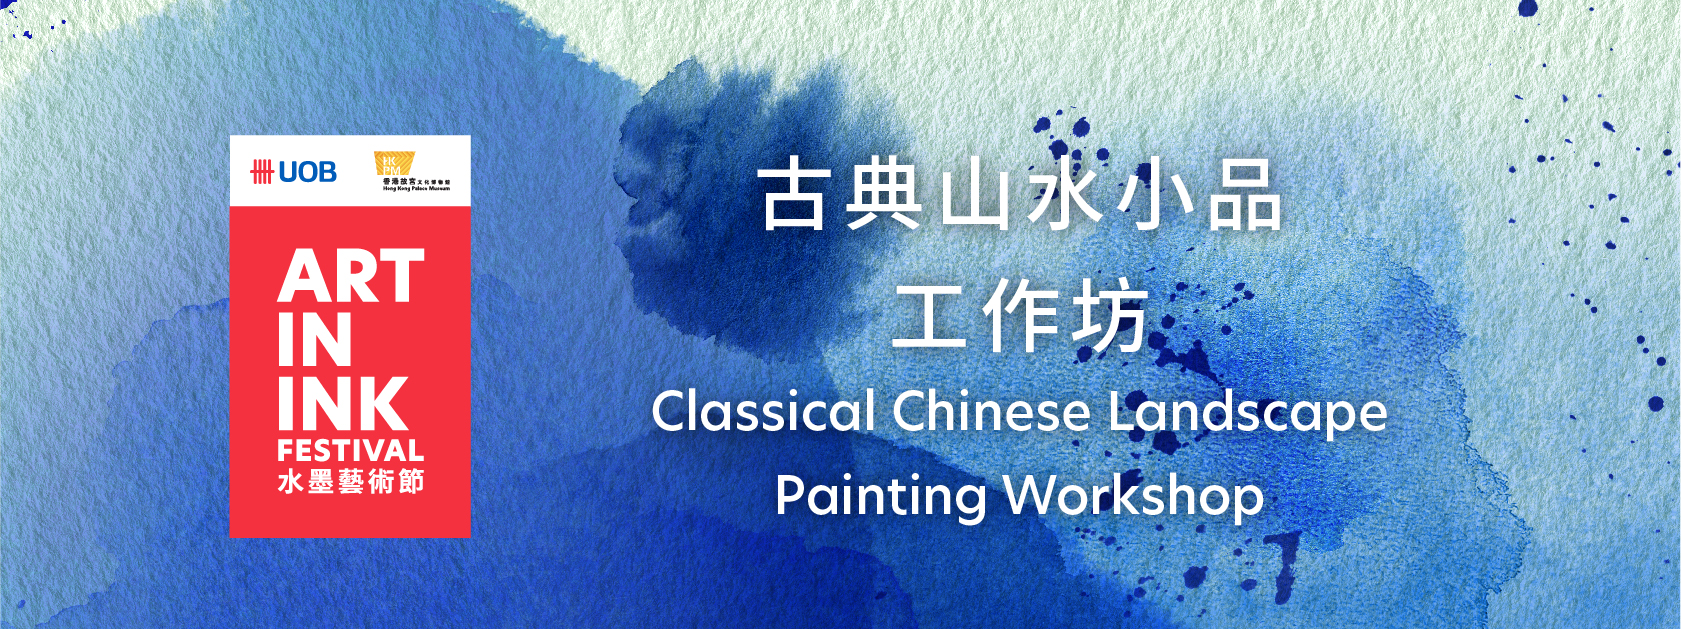 Classical Chinese Landscape Painting Workshop